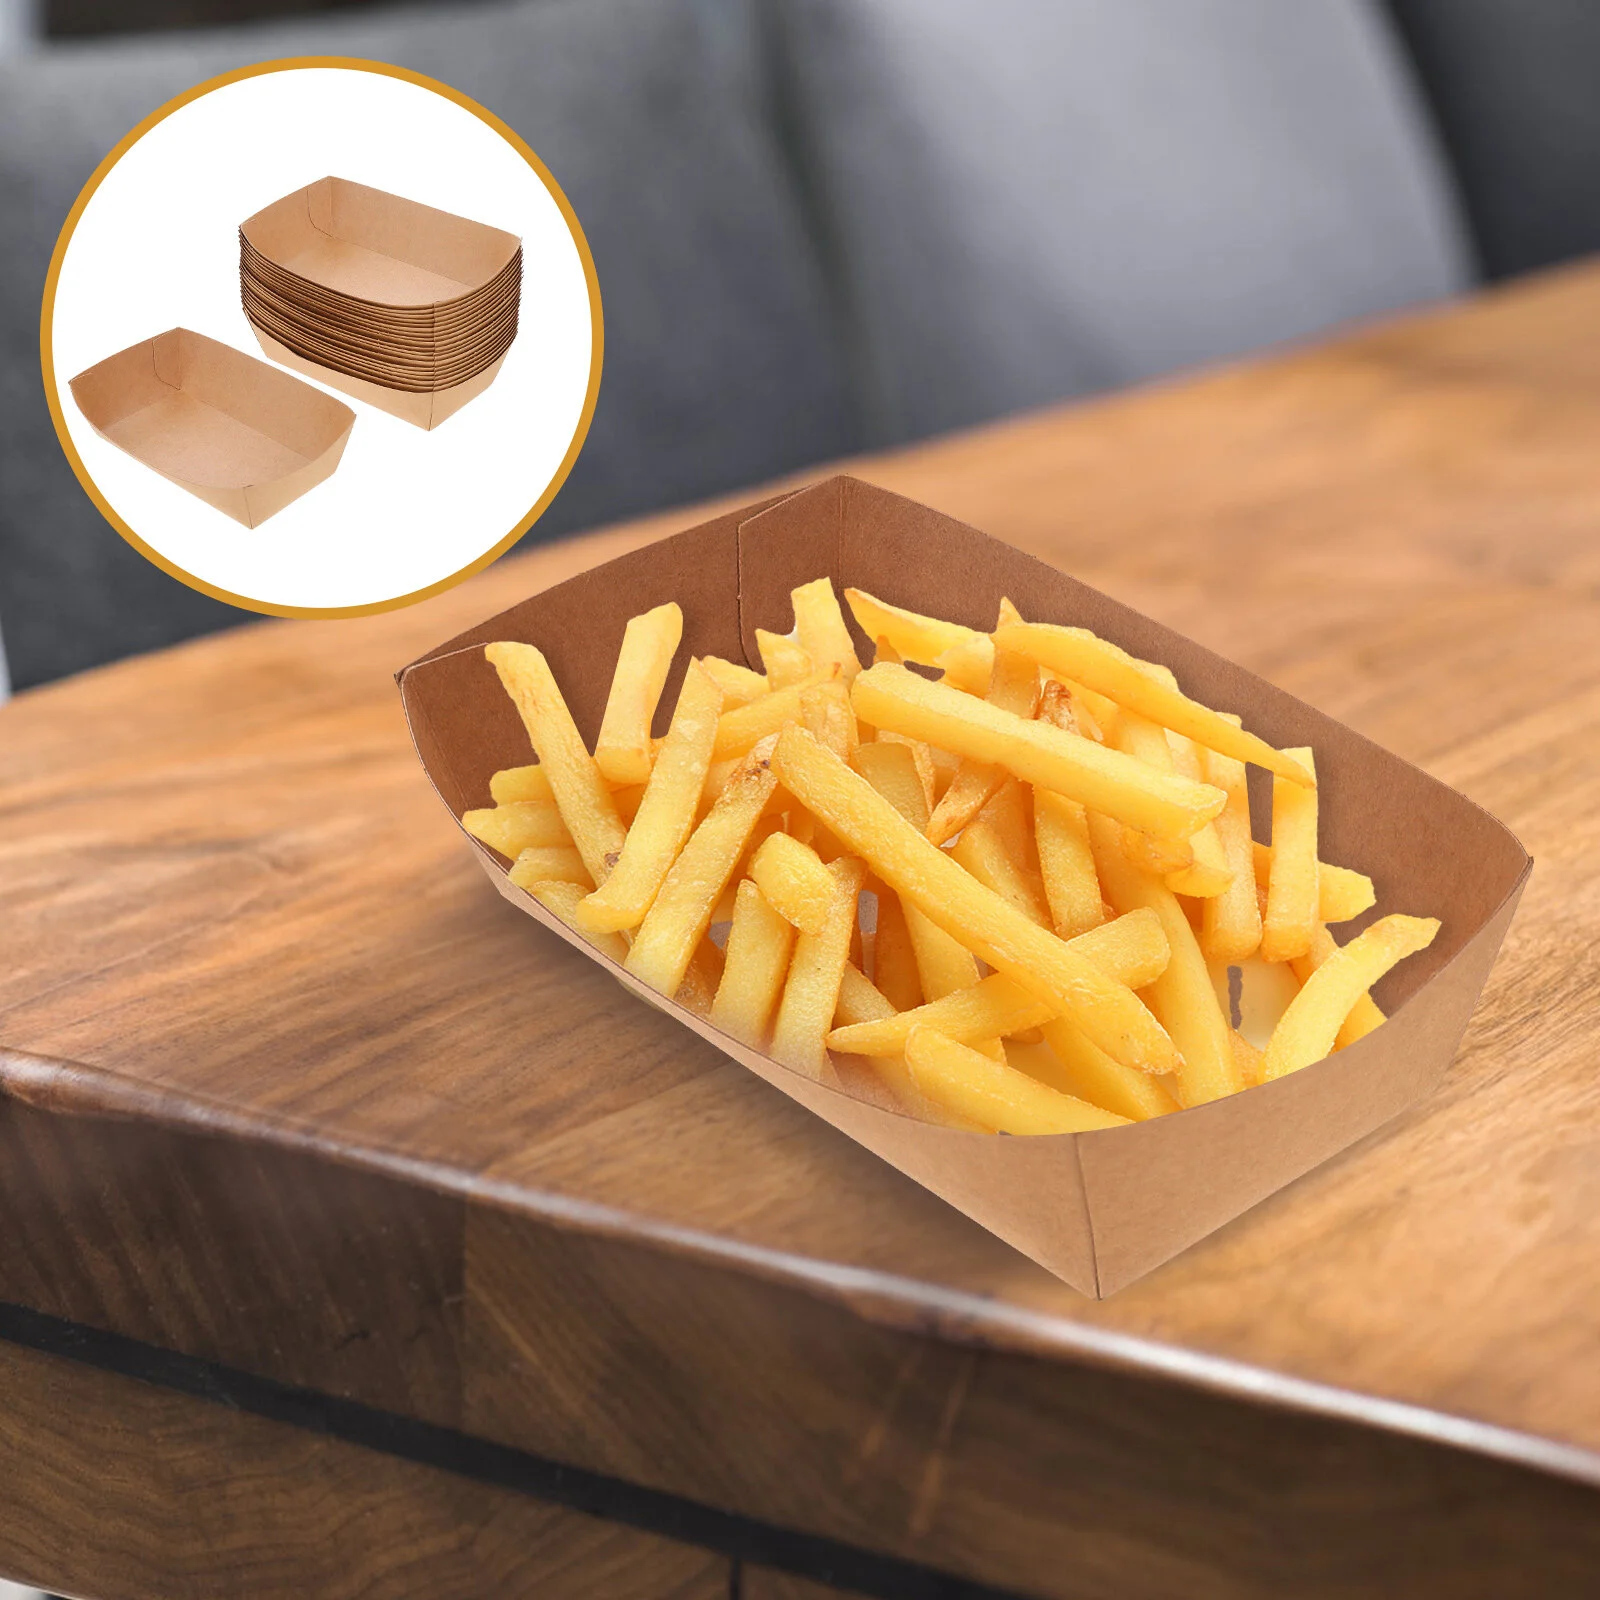 

100pcs Paper Trays Paper Boats Greaseproof Nacho Trays Take Out Serving Boats Baskets Trays for Party Snacks French Fries